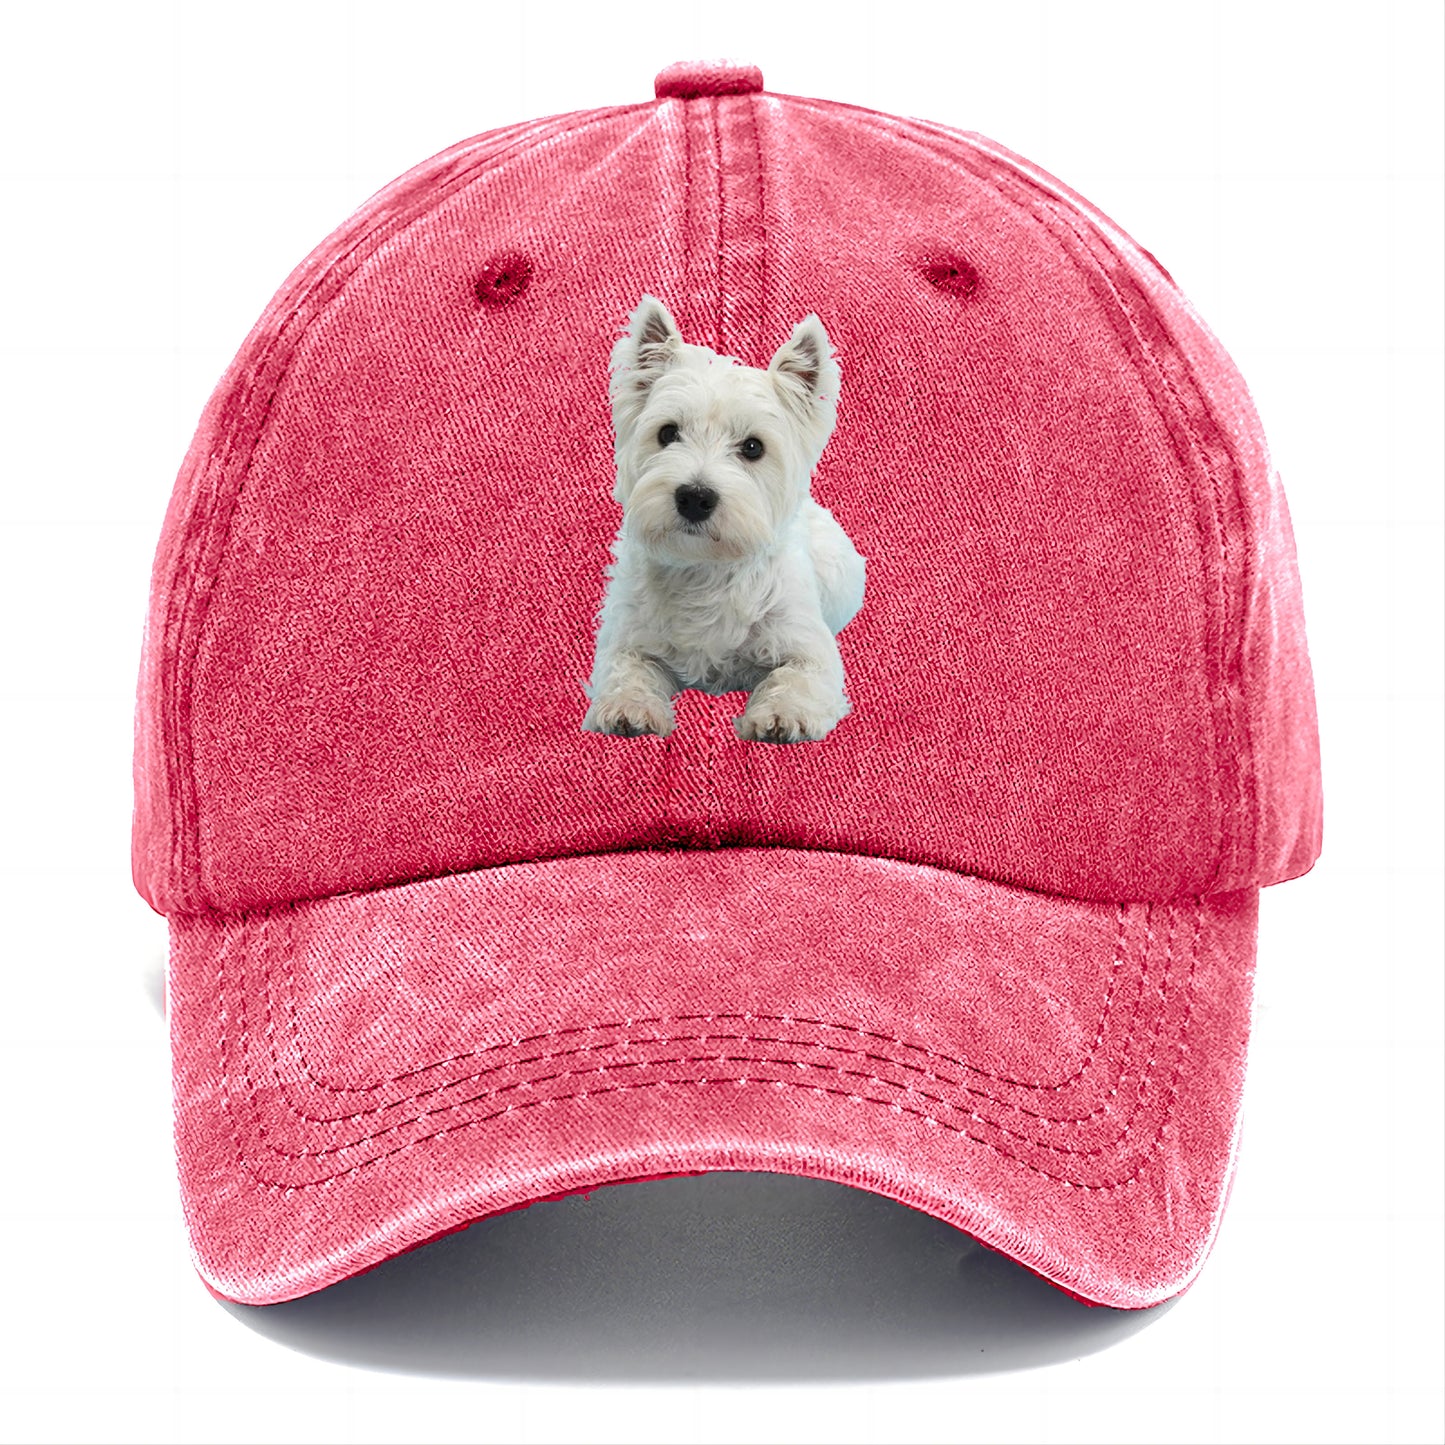 West Highland White Terrier Dog Classic Cap